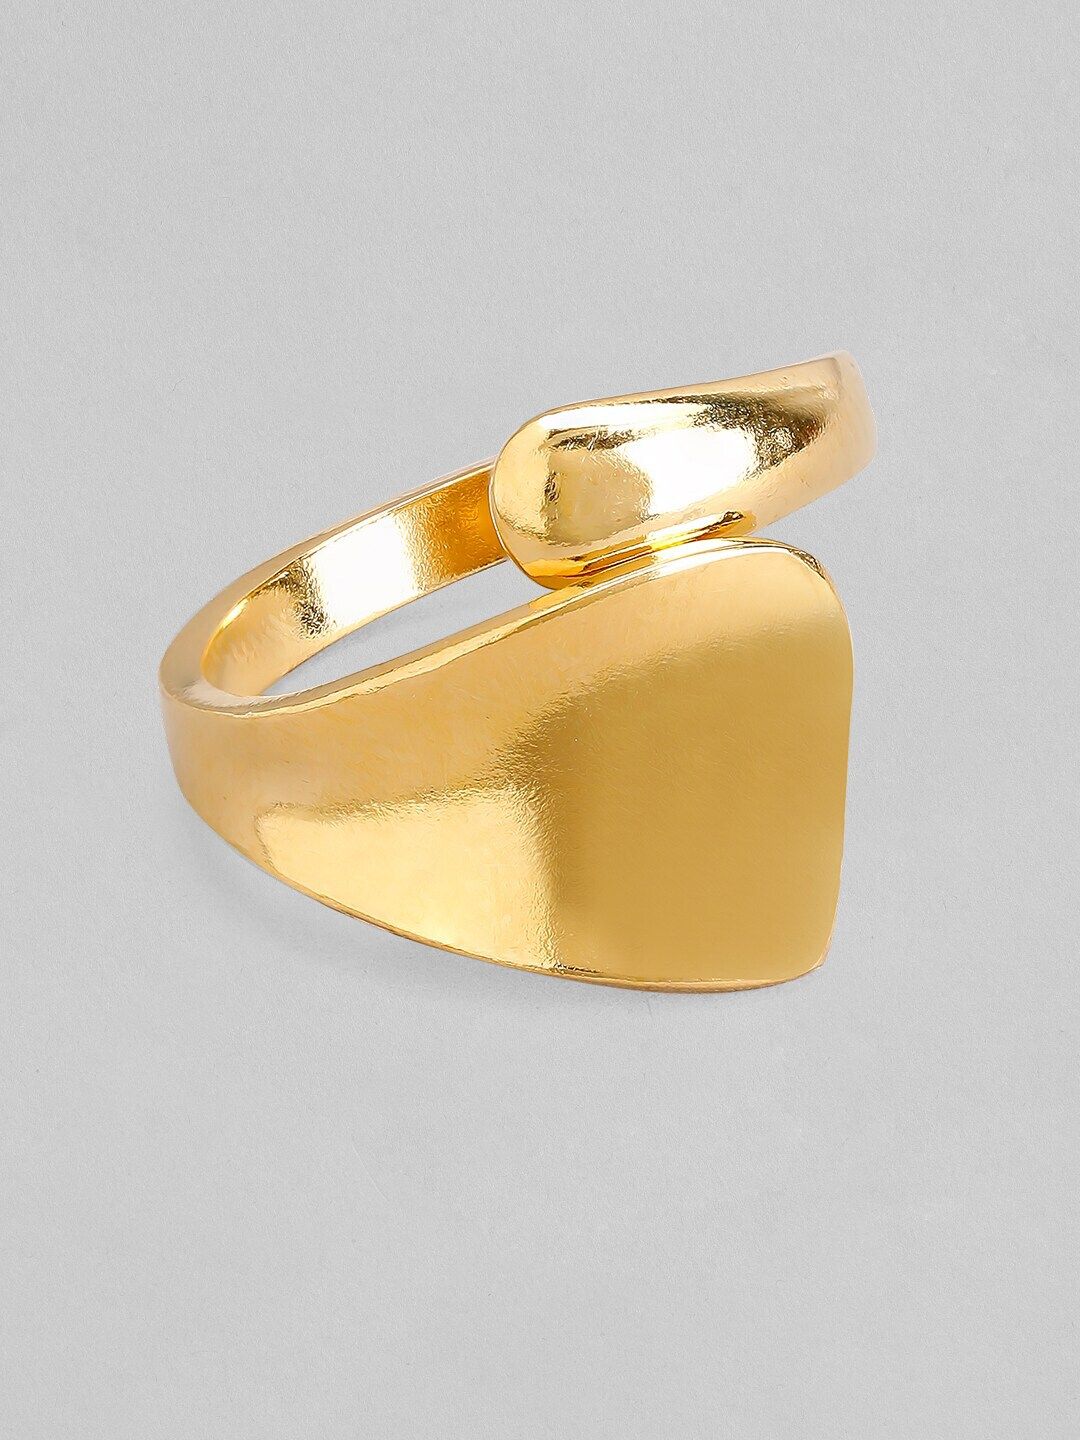 Rubans Voguish Gold-Plated Statement Finger Ring Price in India